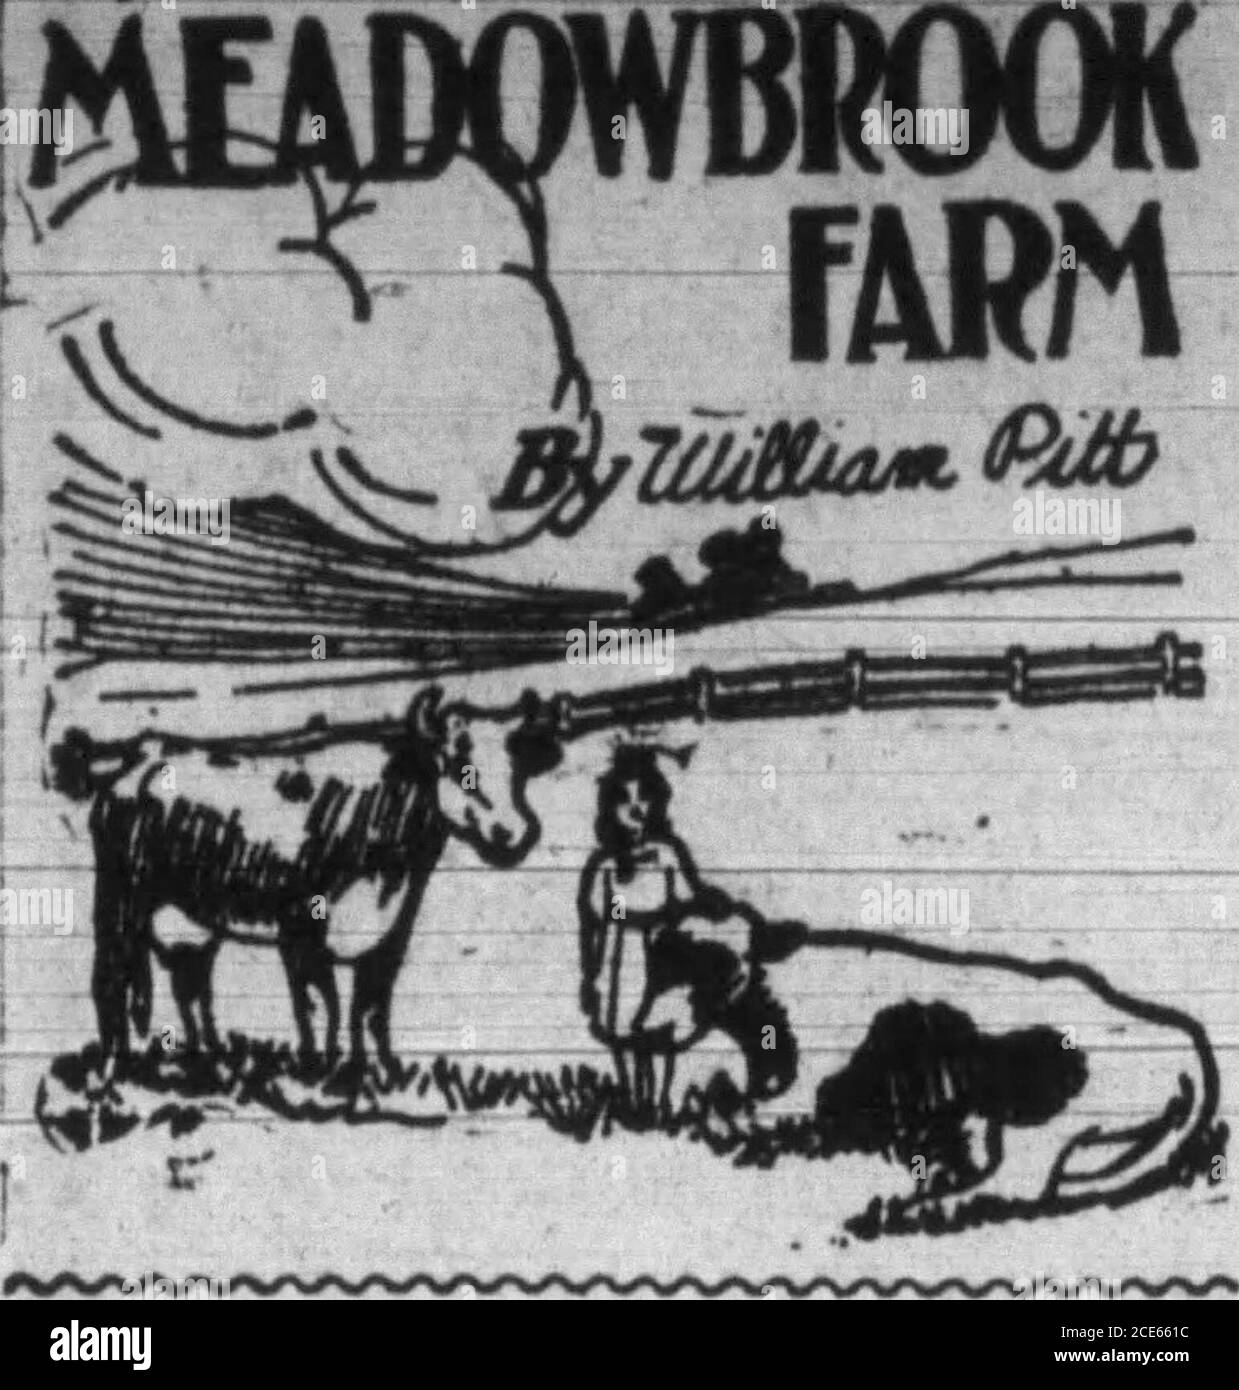 . Boone County Recorder . n 1 Dont burn the straw. • • • i Sheep are good foragers. • • • Hogs suffer for the want of water. • • •For winter lambs the ewes should ibe bred in July. • • • Eggs in winter mean money and thelack of them means loss.» ? • Good roads mean good schools;good schools good citizenship. • . • • • Good roads bring the producer and consumer In t*n*jl contact. ** • • *v Marketing the products of the farmis of equal importance as their pro-duction. • • • In order to obtain eggs it is neces-sary to have healthy, vigorous stock,properly fed. • • • Butter churned too soft cannot Stock Photo